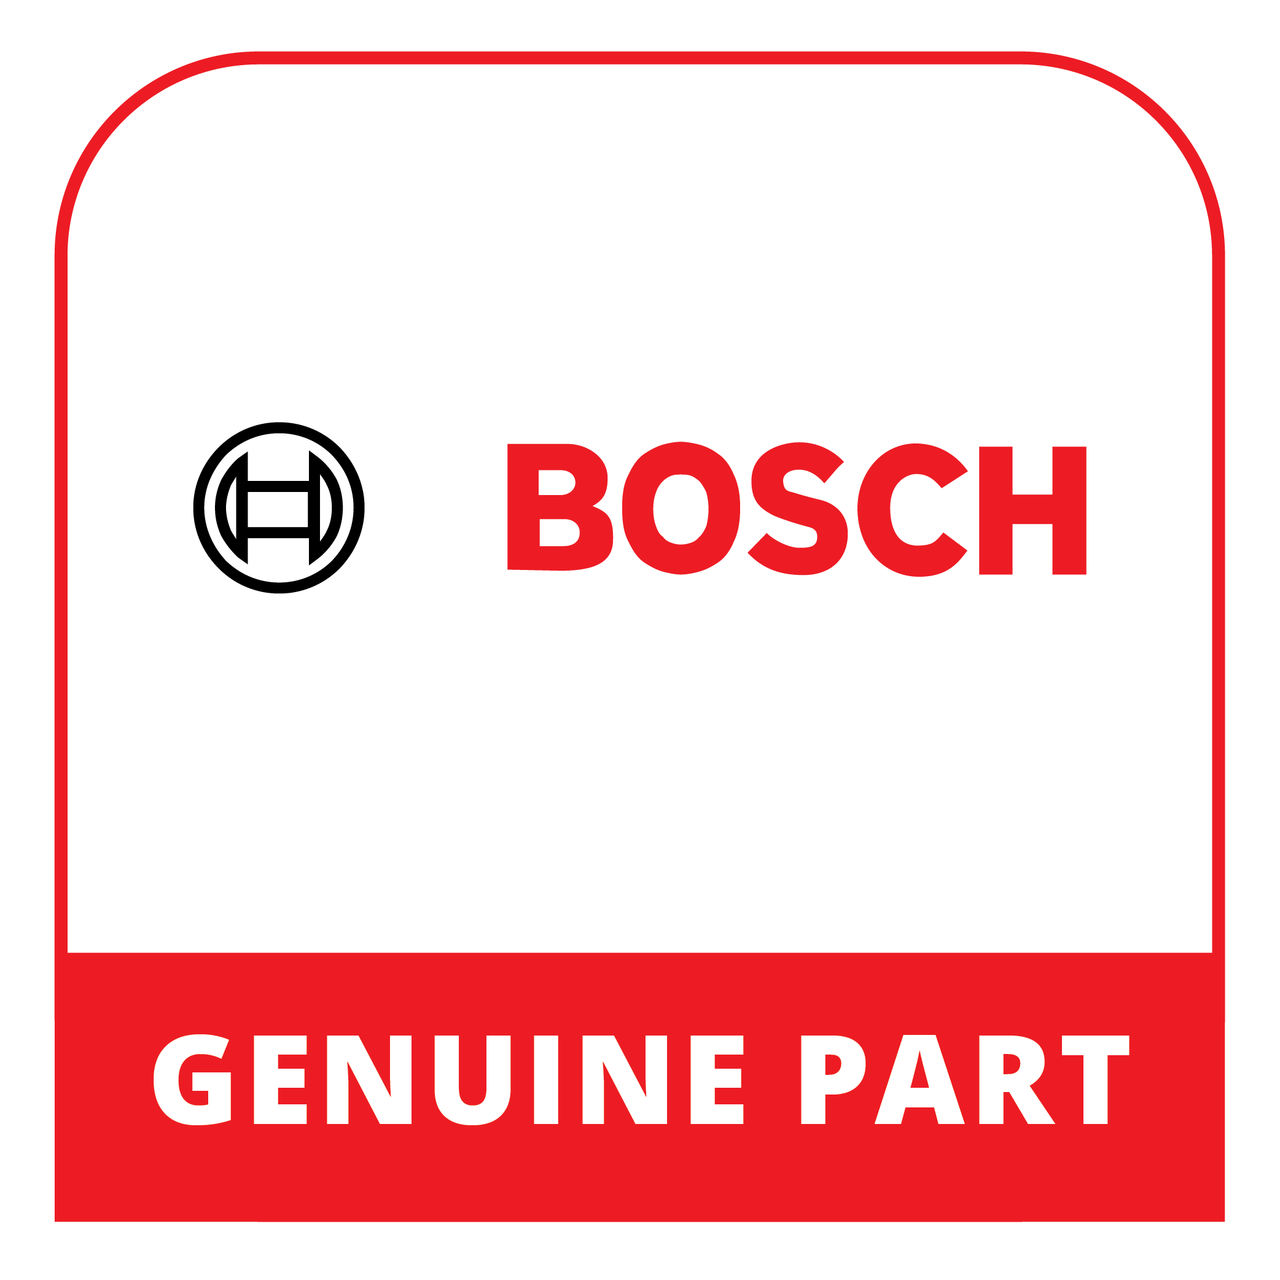 Bosch (Thermador) 12029007 - Cable Harness - Genuine Bosch (Thermador) Part